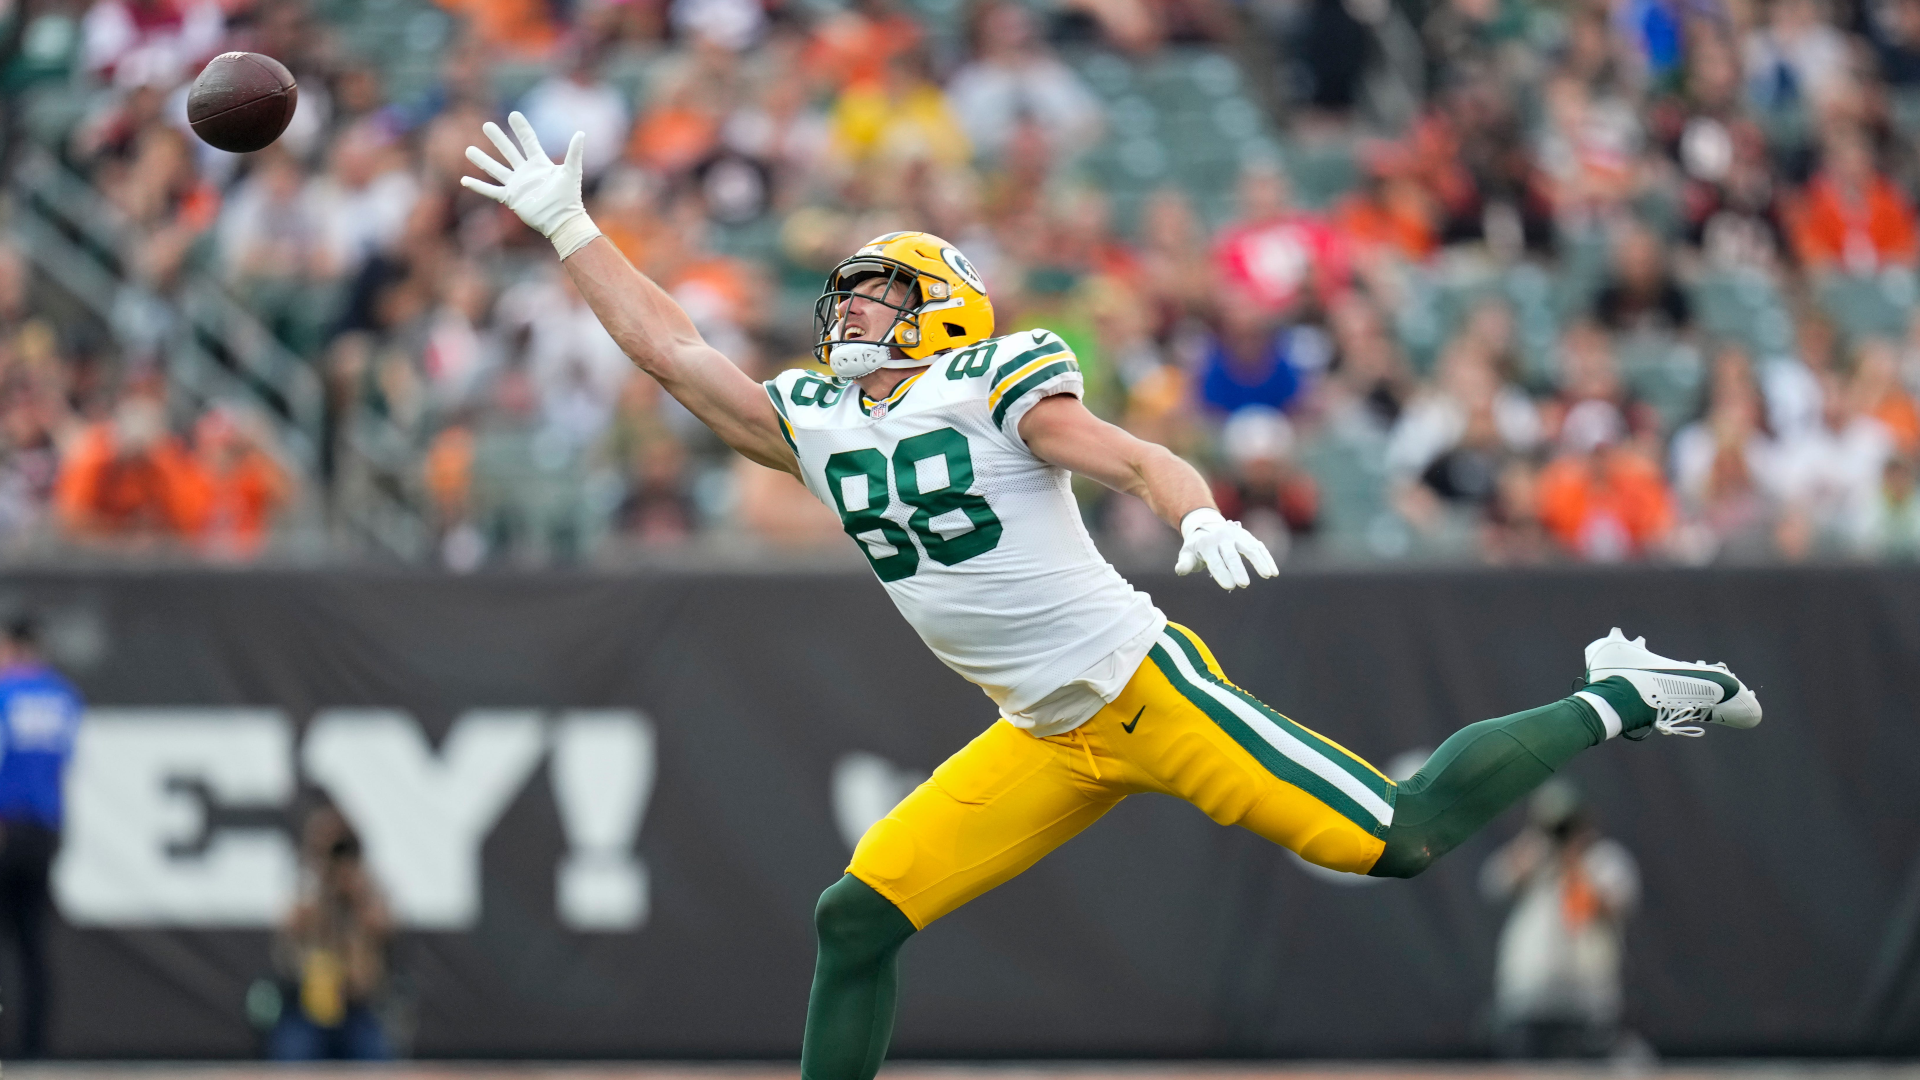 Luke Musgrave: The Clear Starting Tight End For The Packers